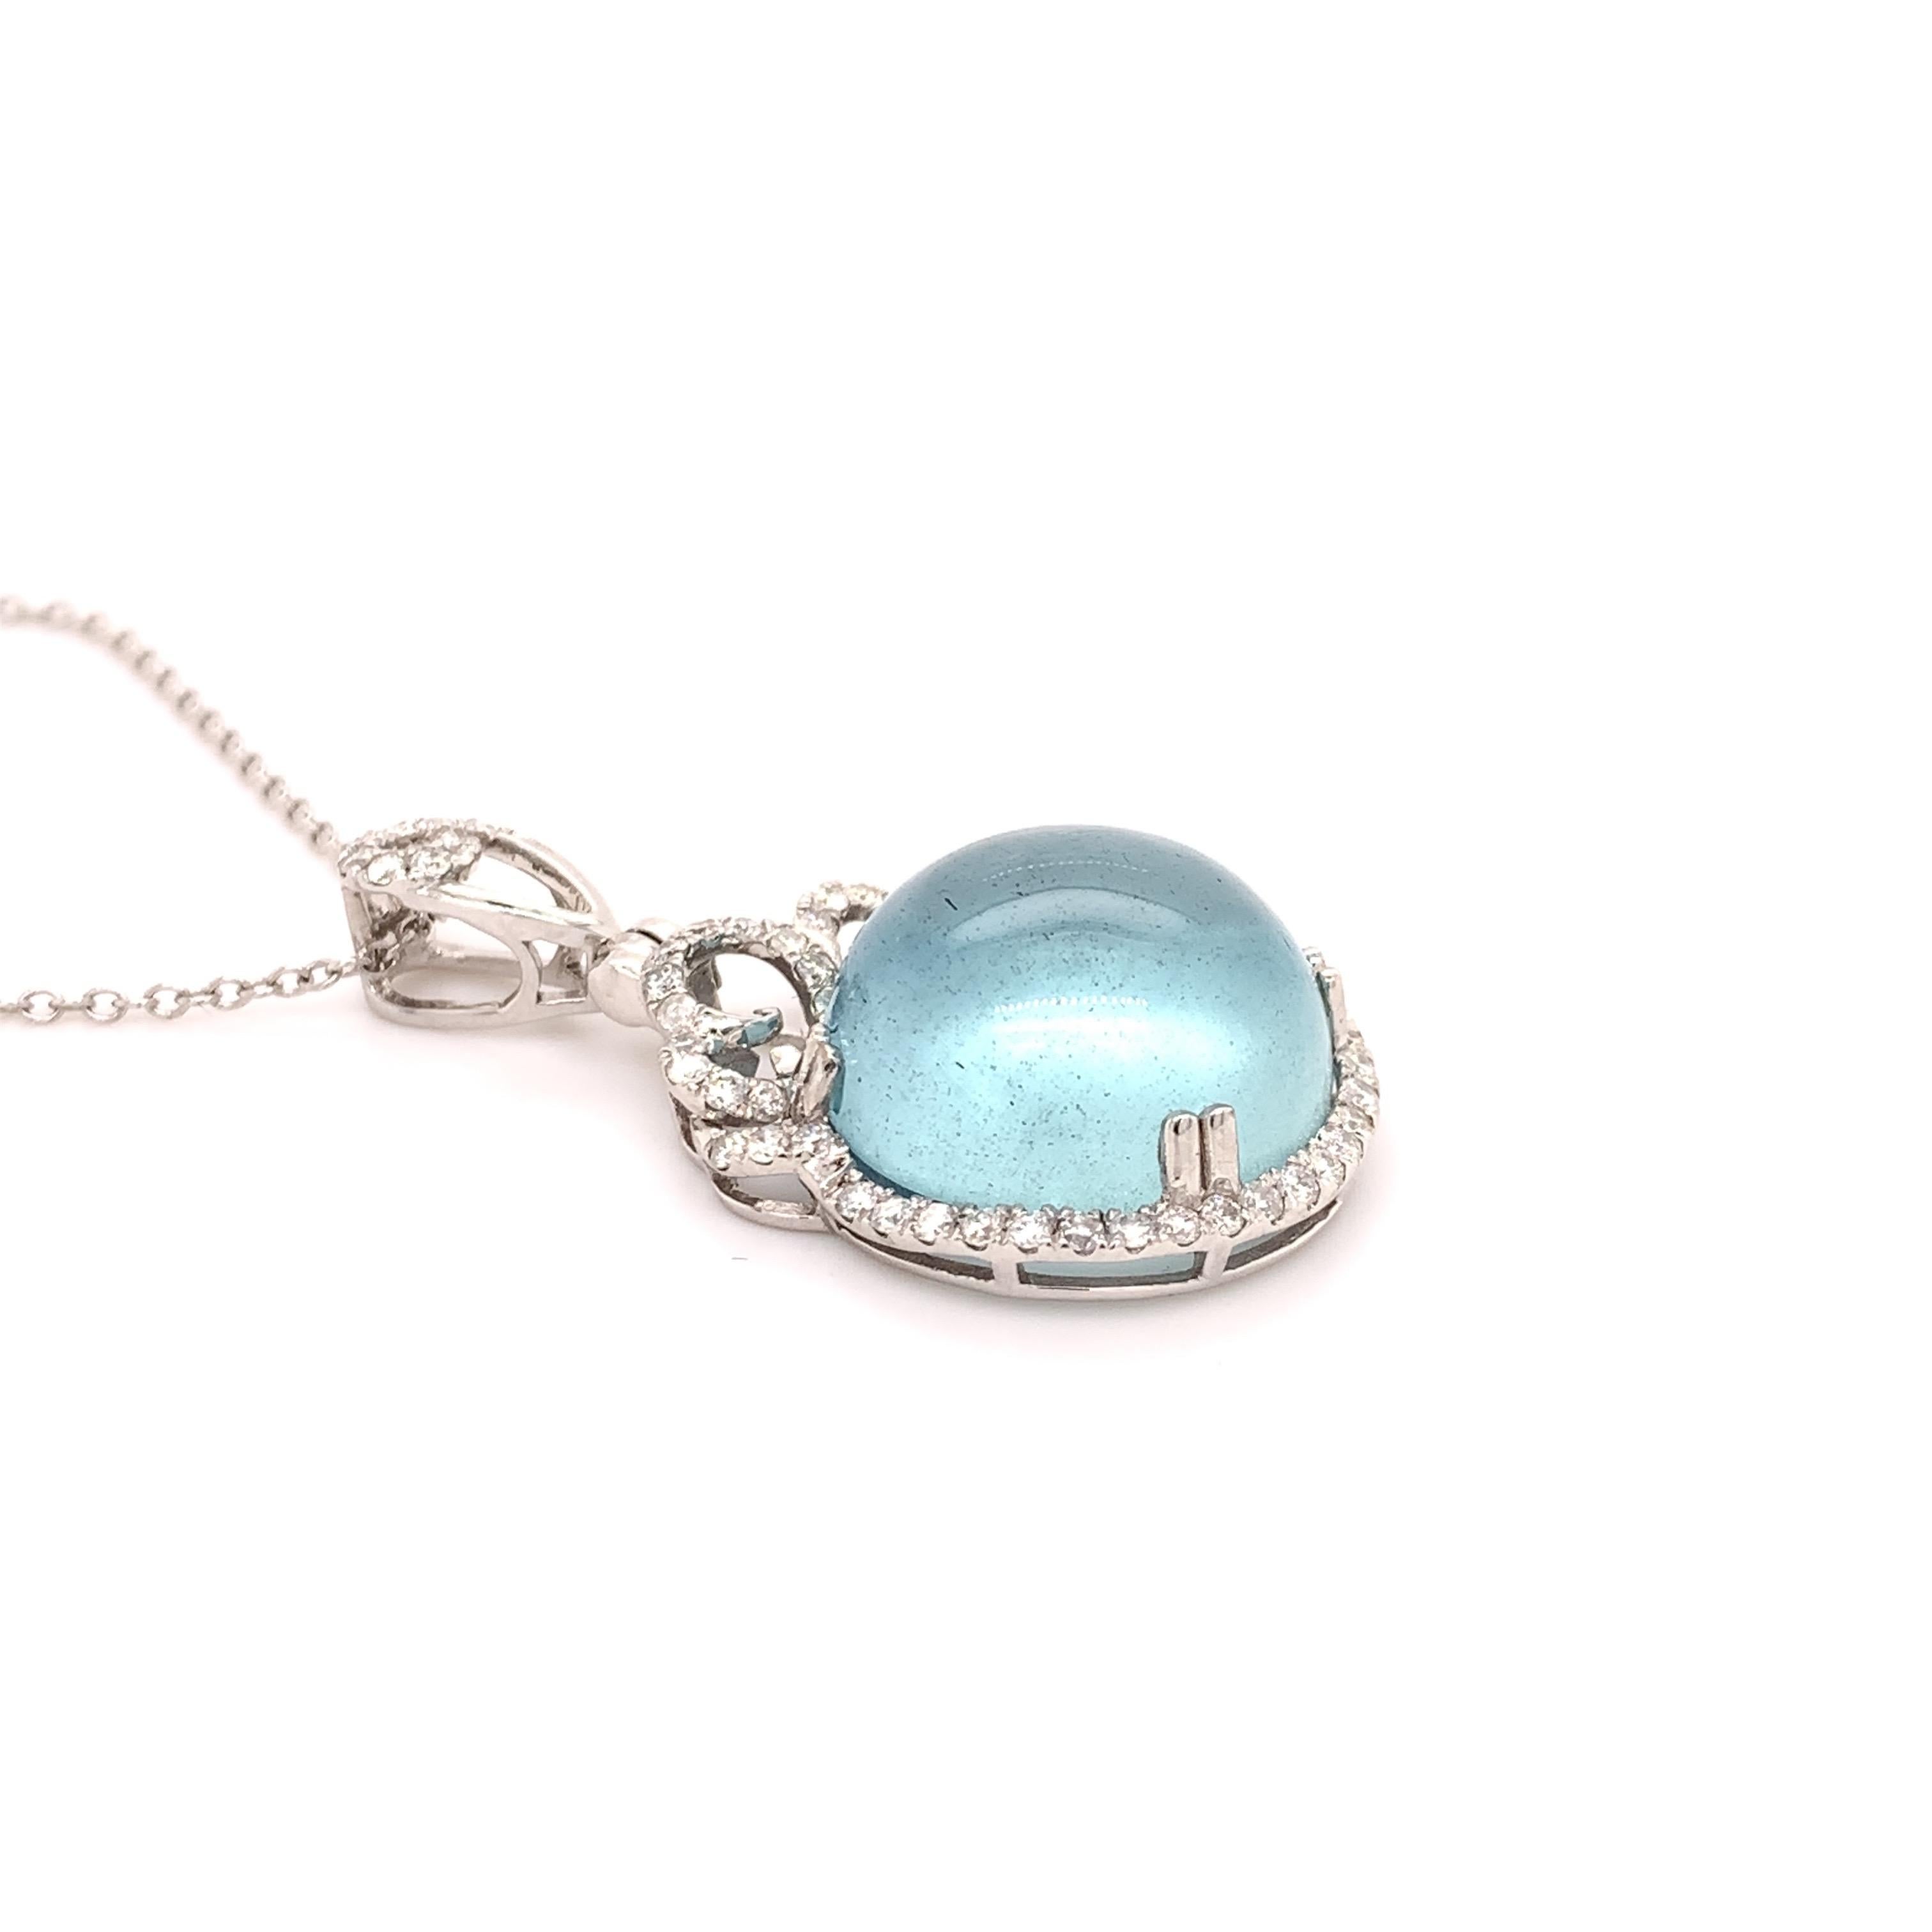 Unique aquamarine diamond pendant. Transparent clean, lively icy blue tone, round faceted, natural cabochon aquamarine  
set in high profile mounting with eight bead prongs, accented with round brilliant cut diamonds. Handcrafted design set in 14